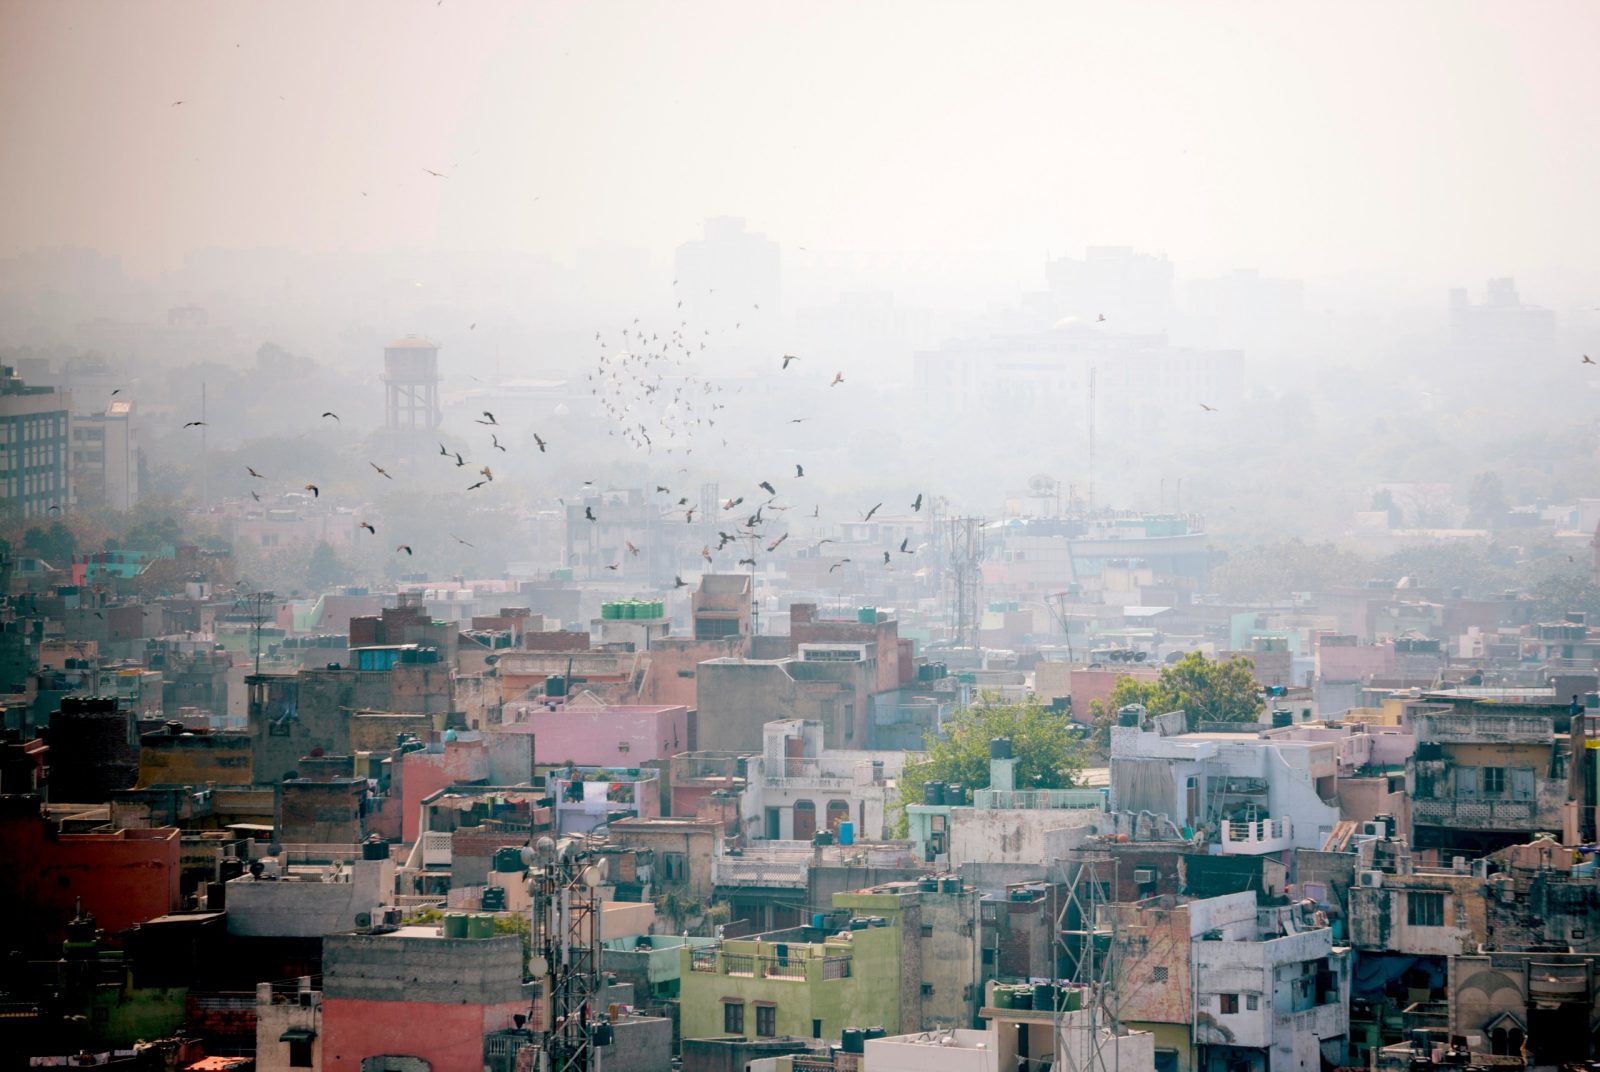 The air over in Delhi, India, is shown as heavily polluted